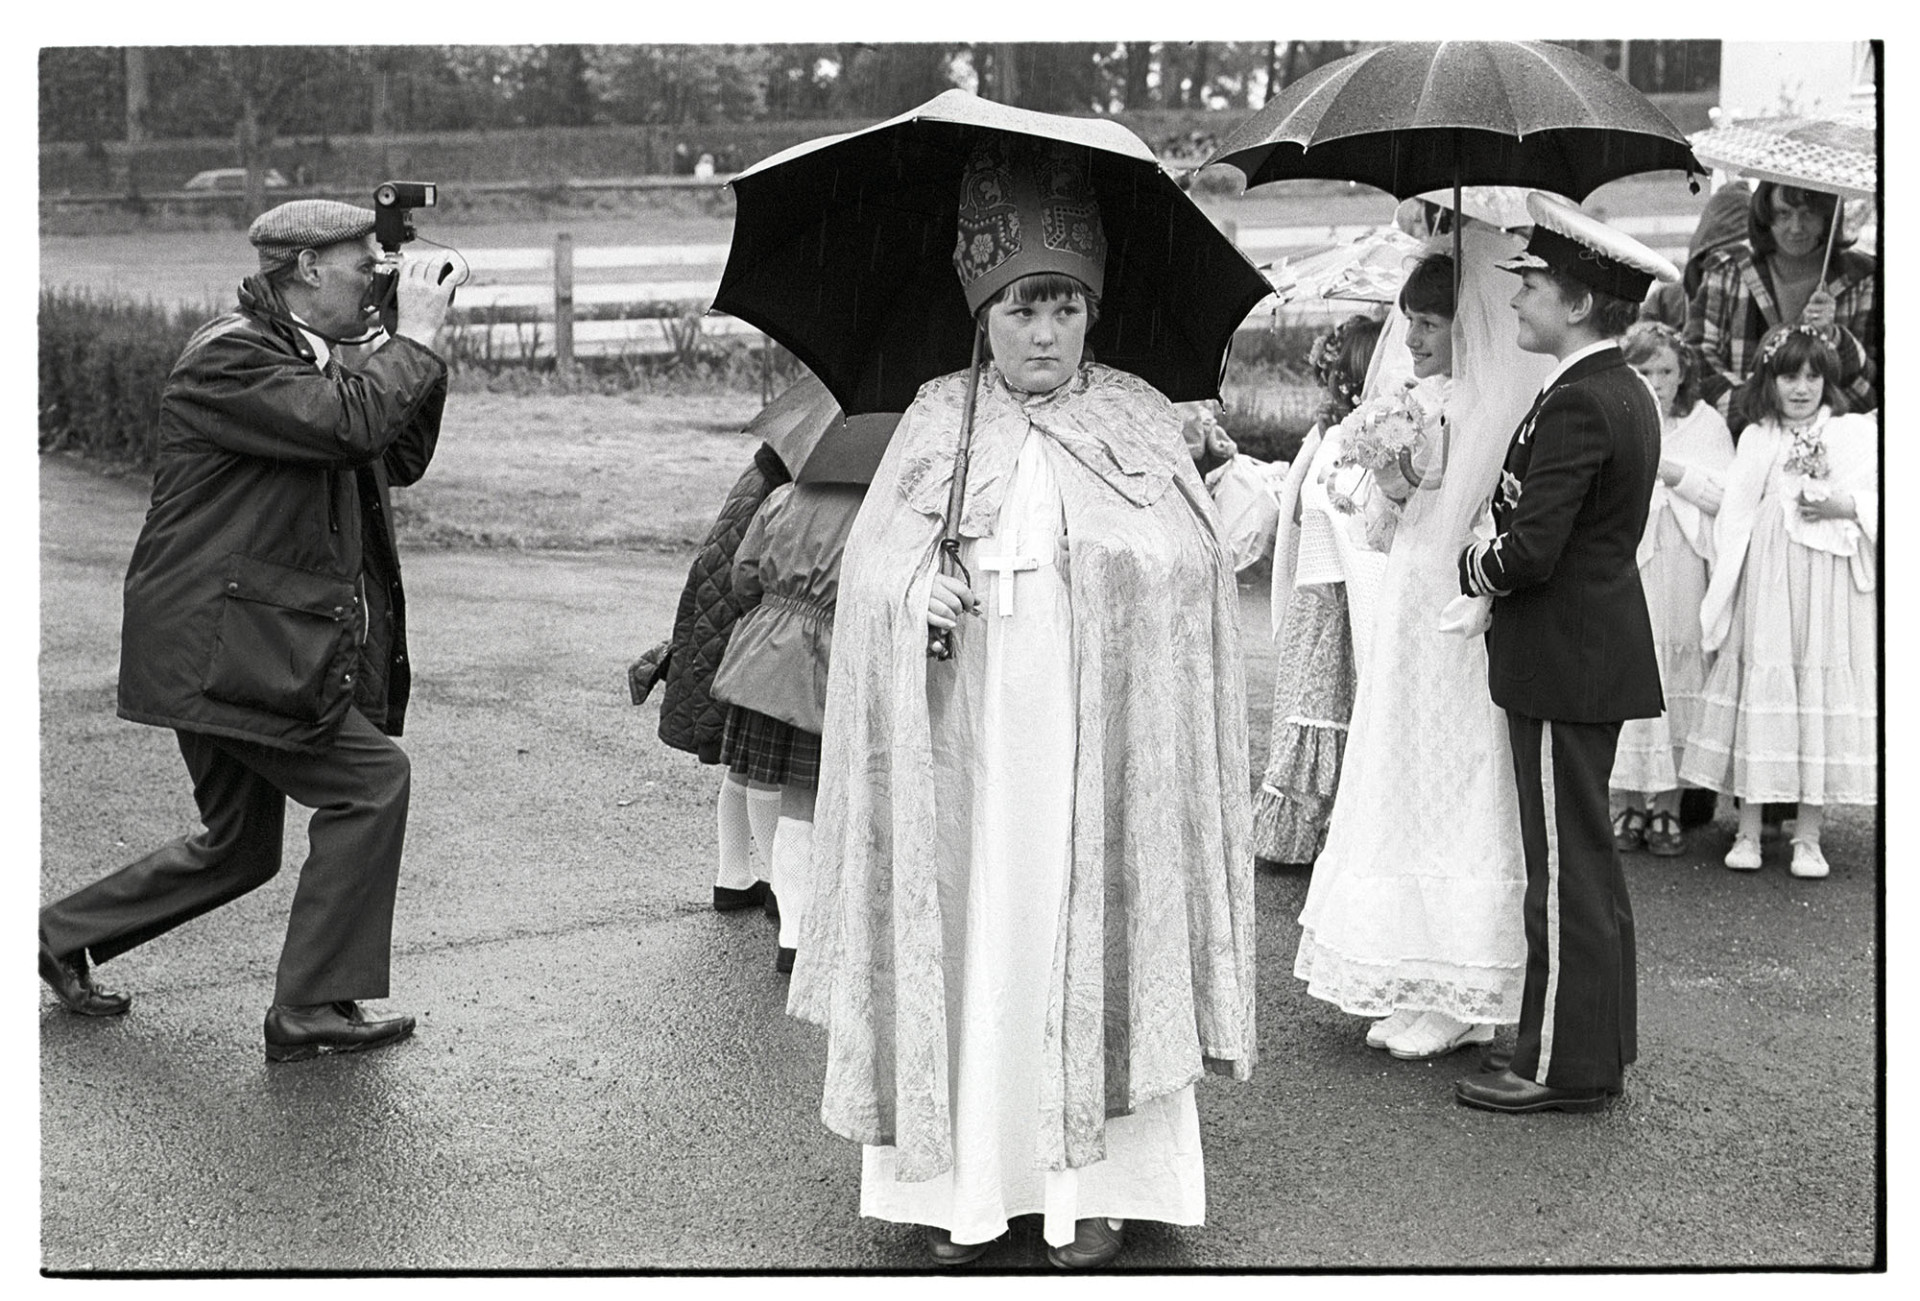 People in fancy dress being photographed, Wedding Charles and Diana, Bishop with umbrella. 
[Children in fancy dress at Torrington May Fair being photographed. Two children are dressed as Prince Charles and Lady Diana Spencer on their wedding day, and another child is dressed as a bishop. They are all holding umbrellas.]